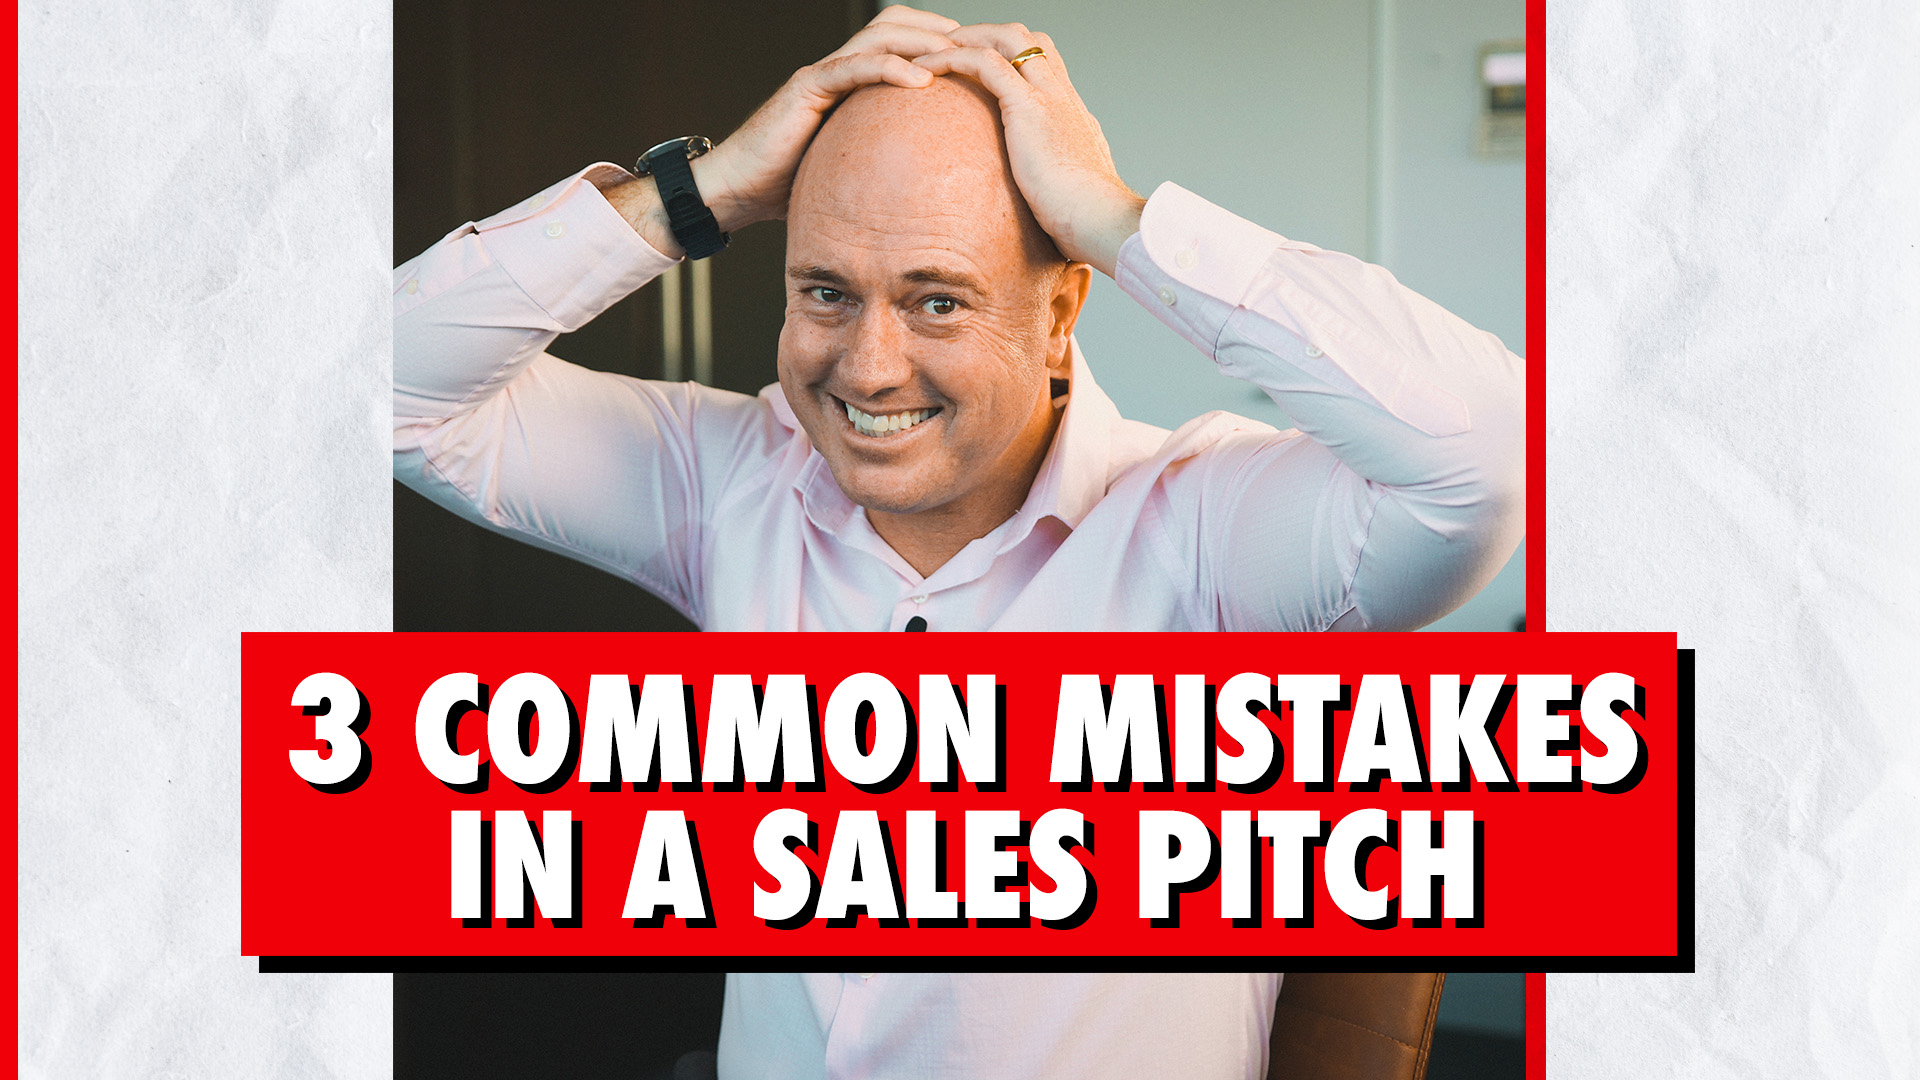 Trevor Ambrose Public Speaking Sales Training Sales Pitch Mistakes Thumbnail